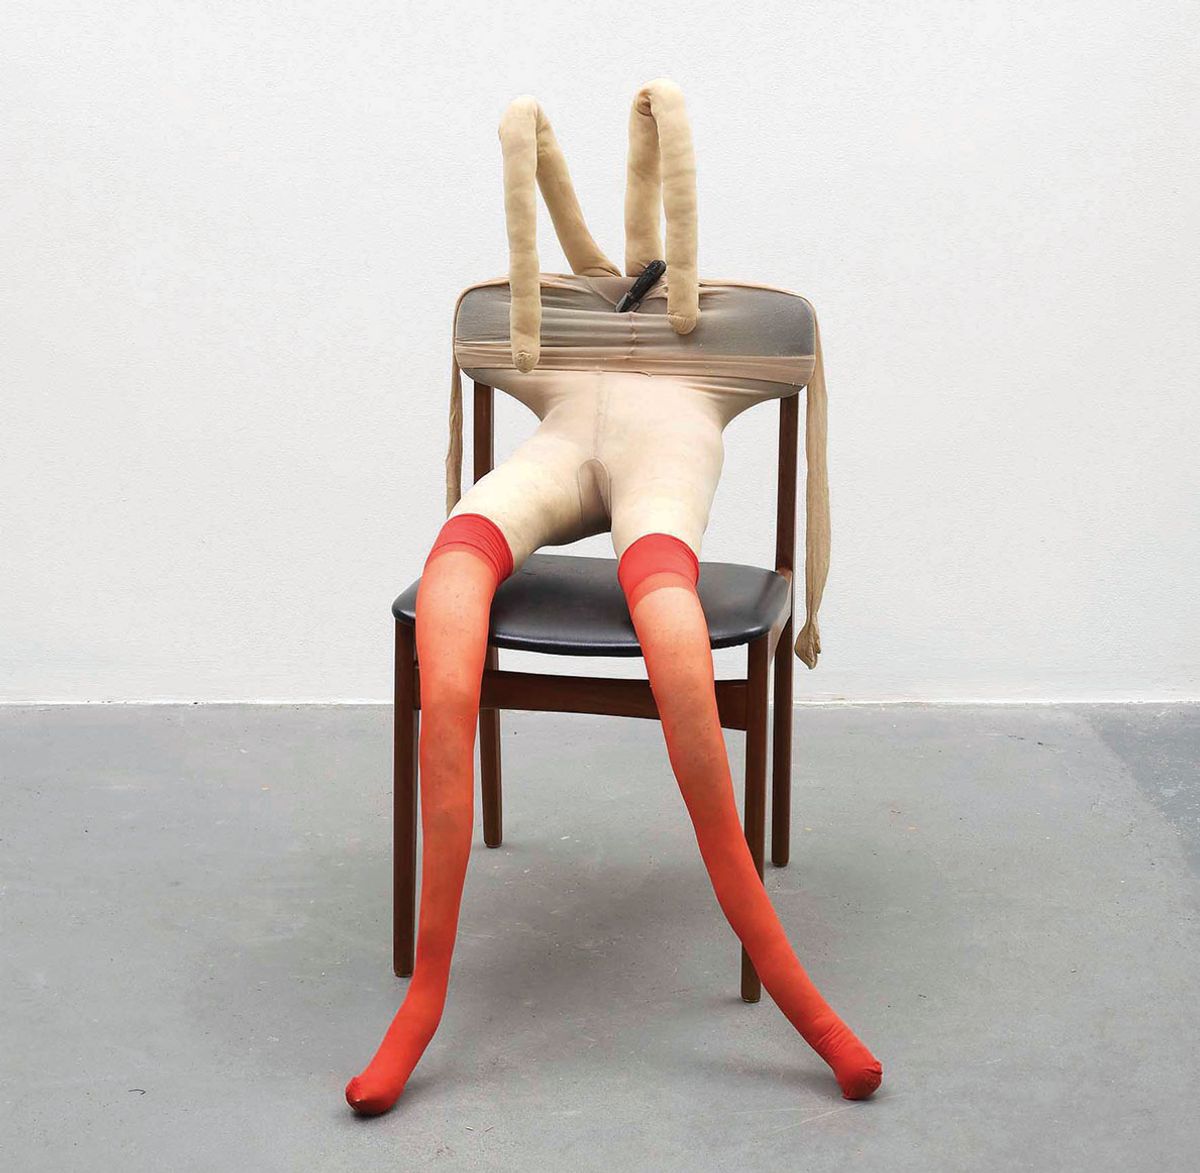 Sarah Lucas’s Bunny Gets Snookered #10 (1997) will be jointly owned by the Guggenheim Museum in New York and the MCA Chicago © The artist; courtesy of Sadie Coles HQ